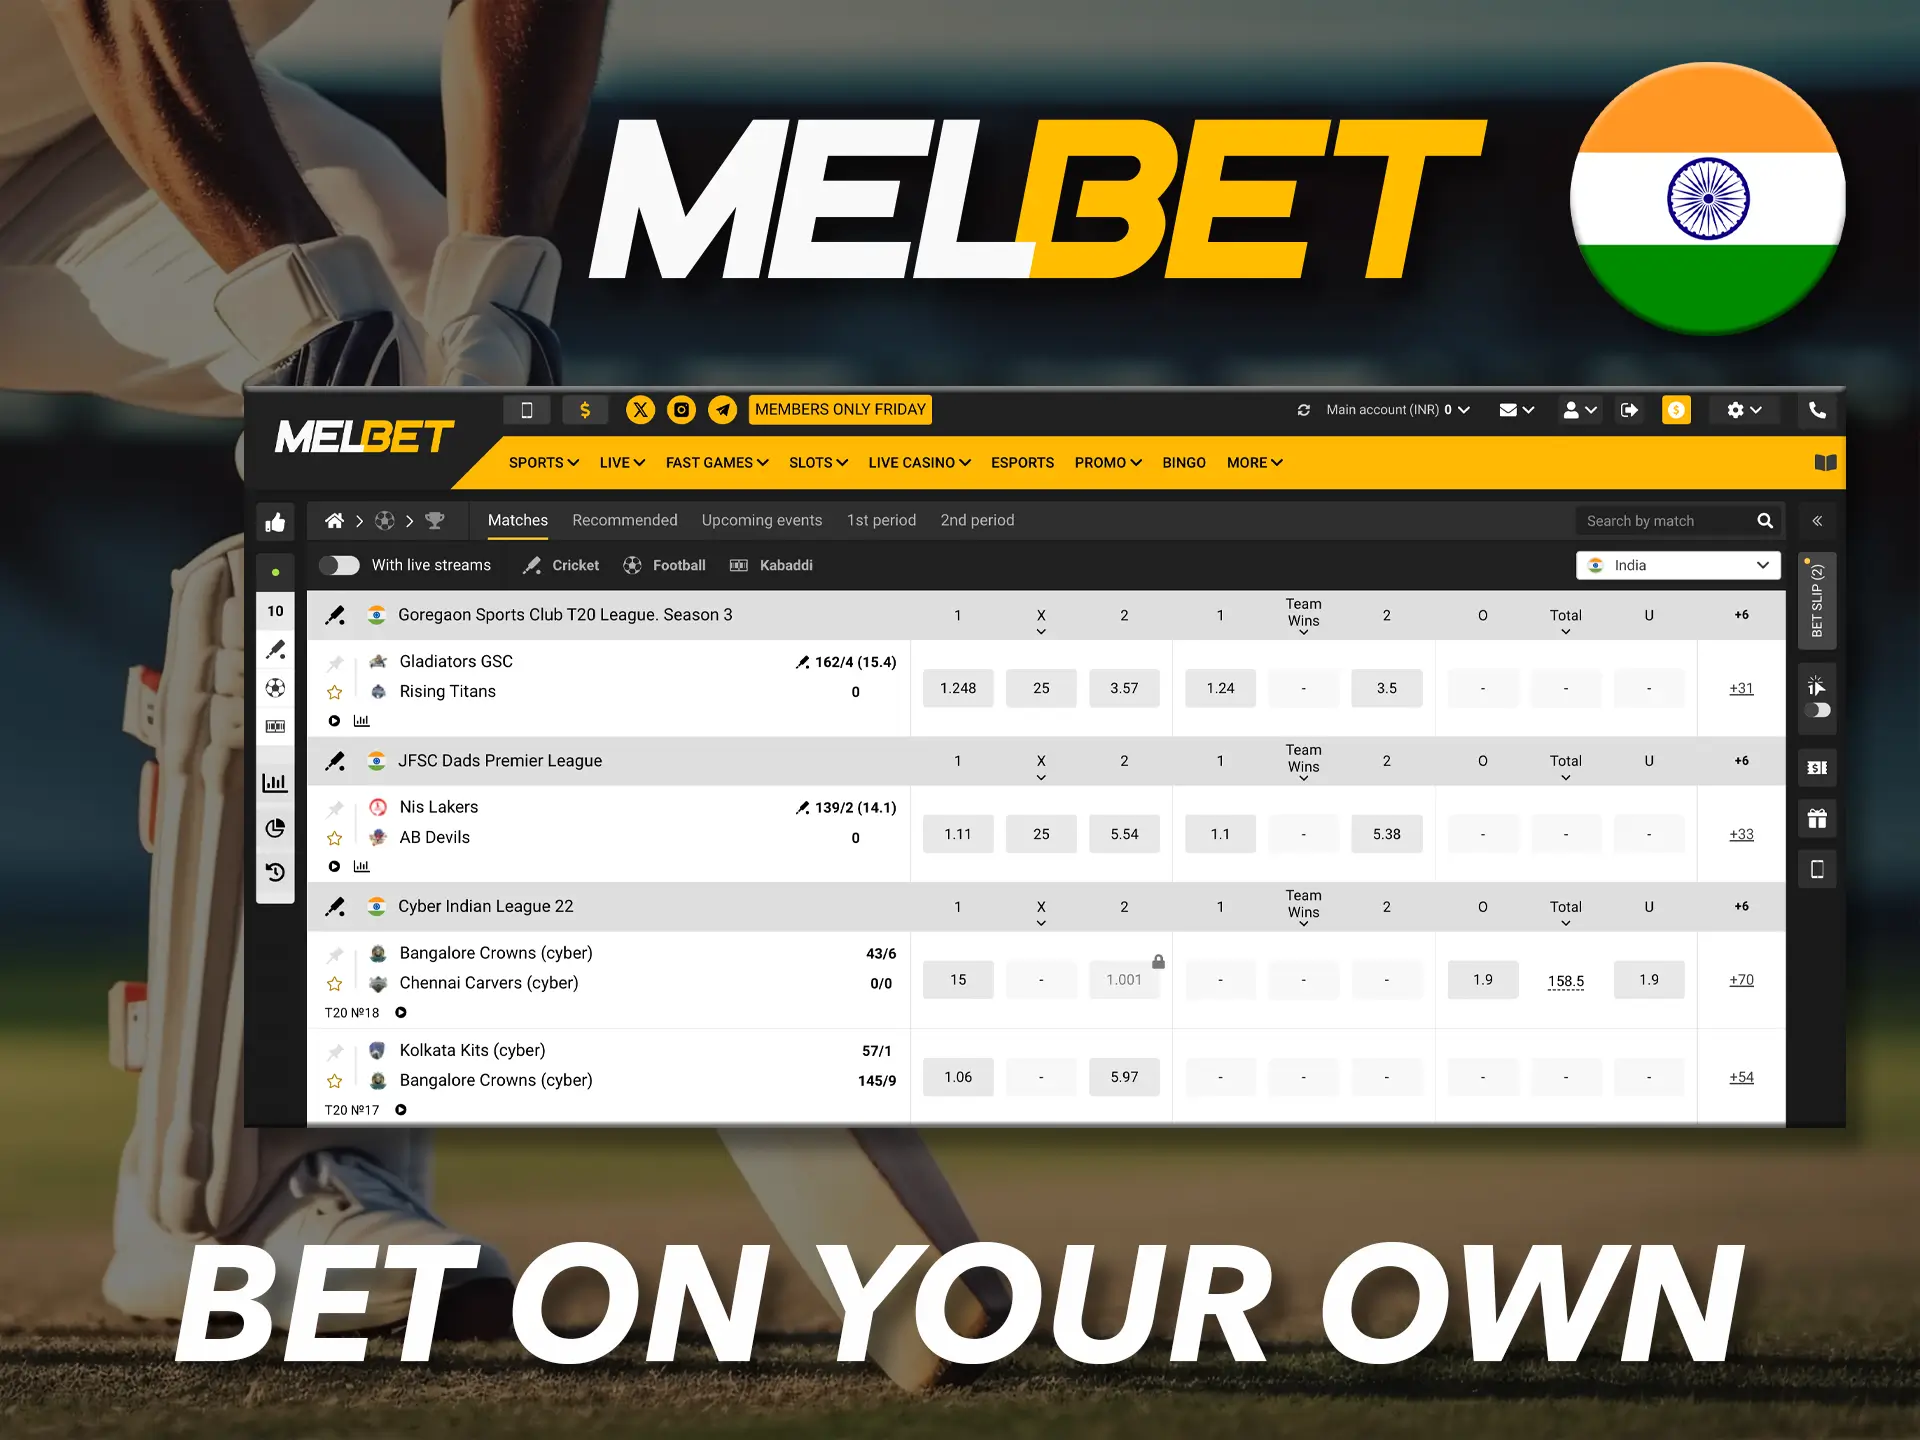 You will find the highest odds in Melbet's domestic league matches.